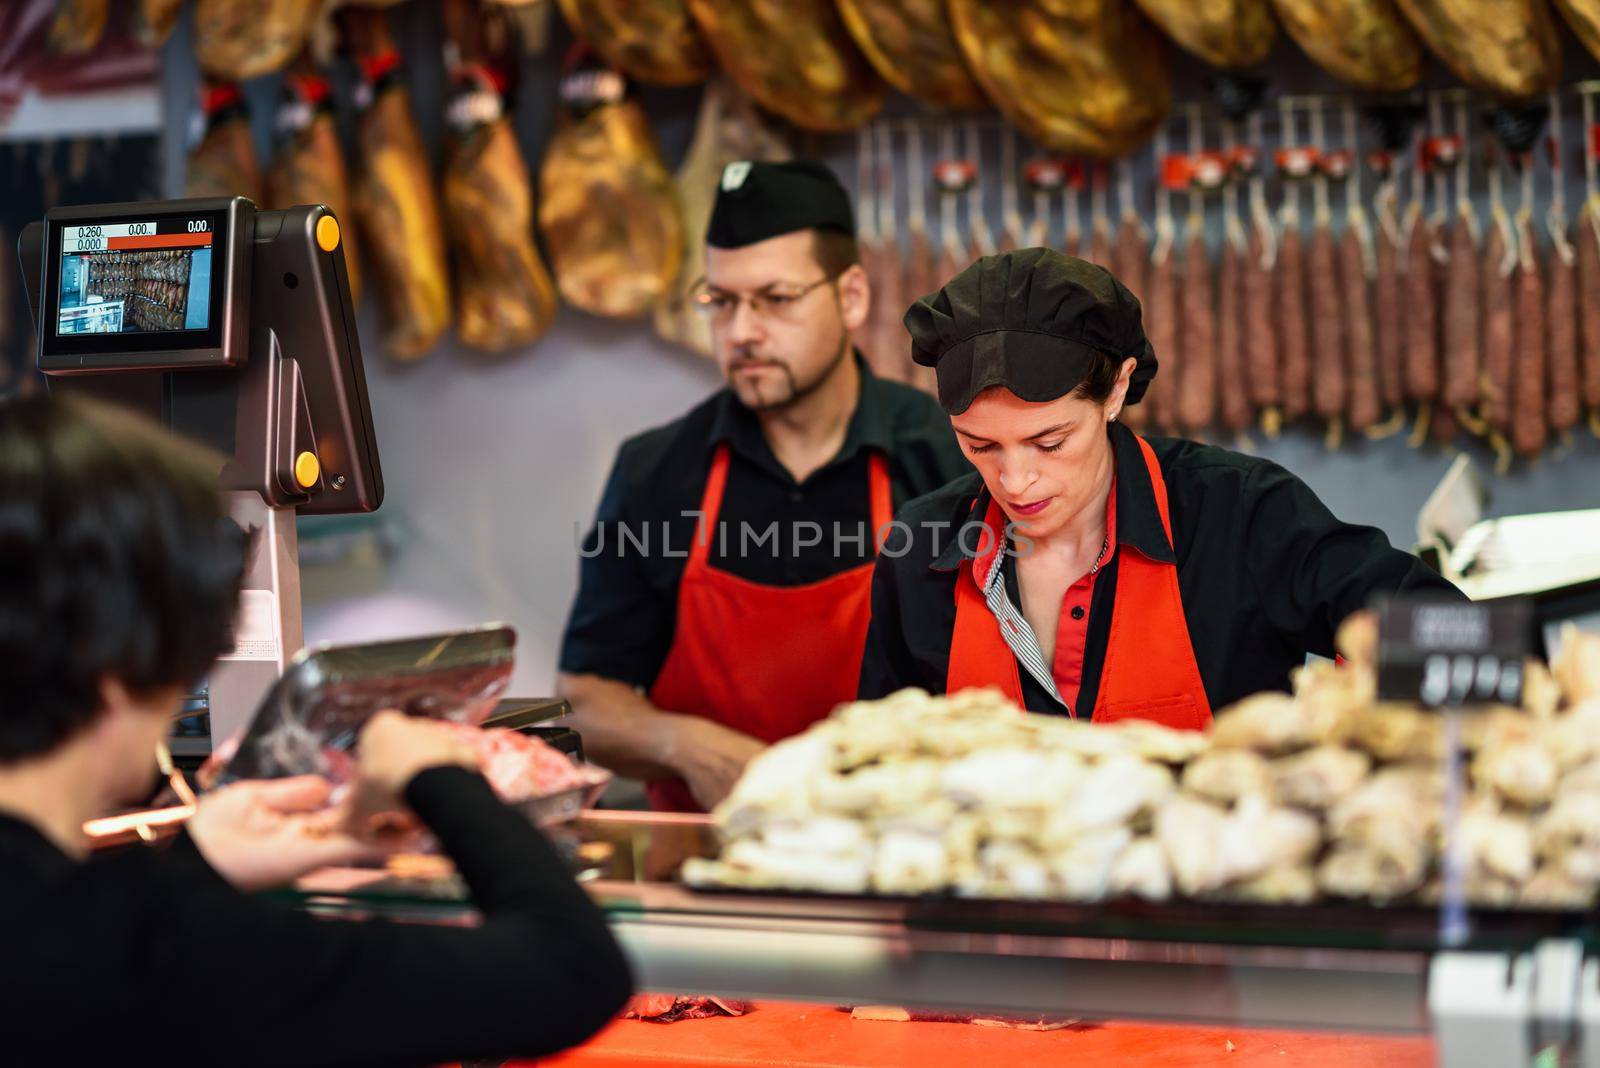 Butchers attending a customer in a butcher's shop weighing the meat and charging